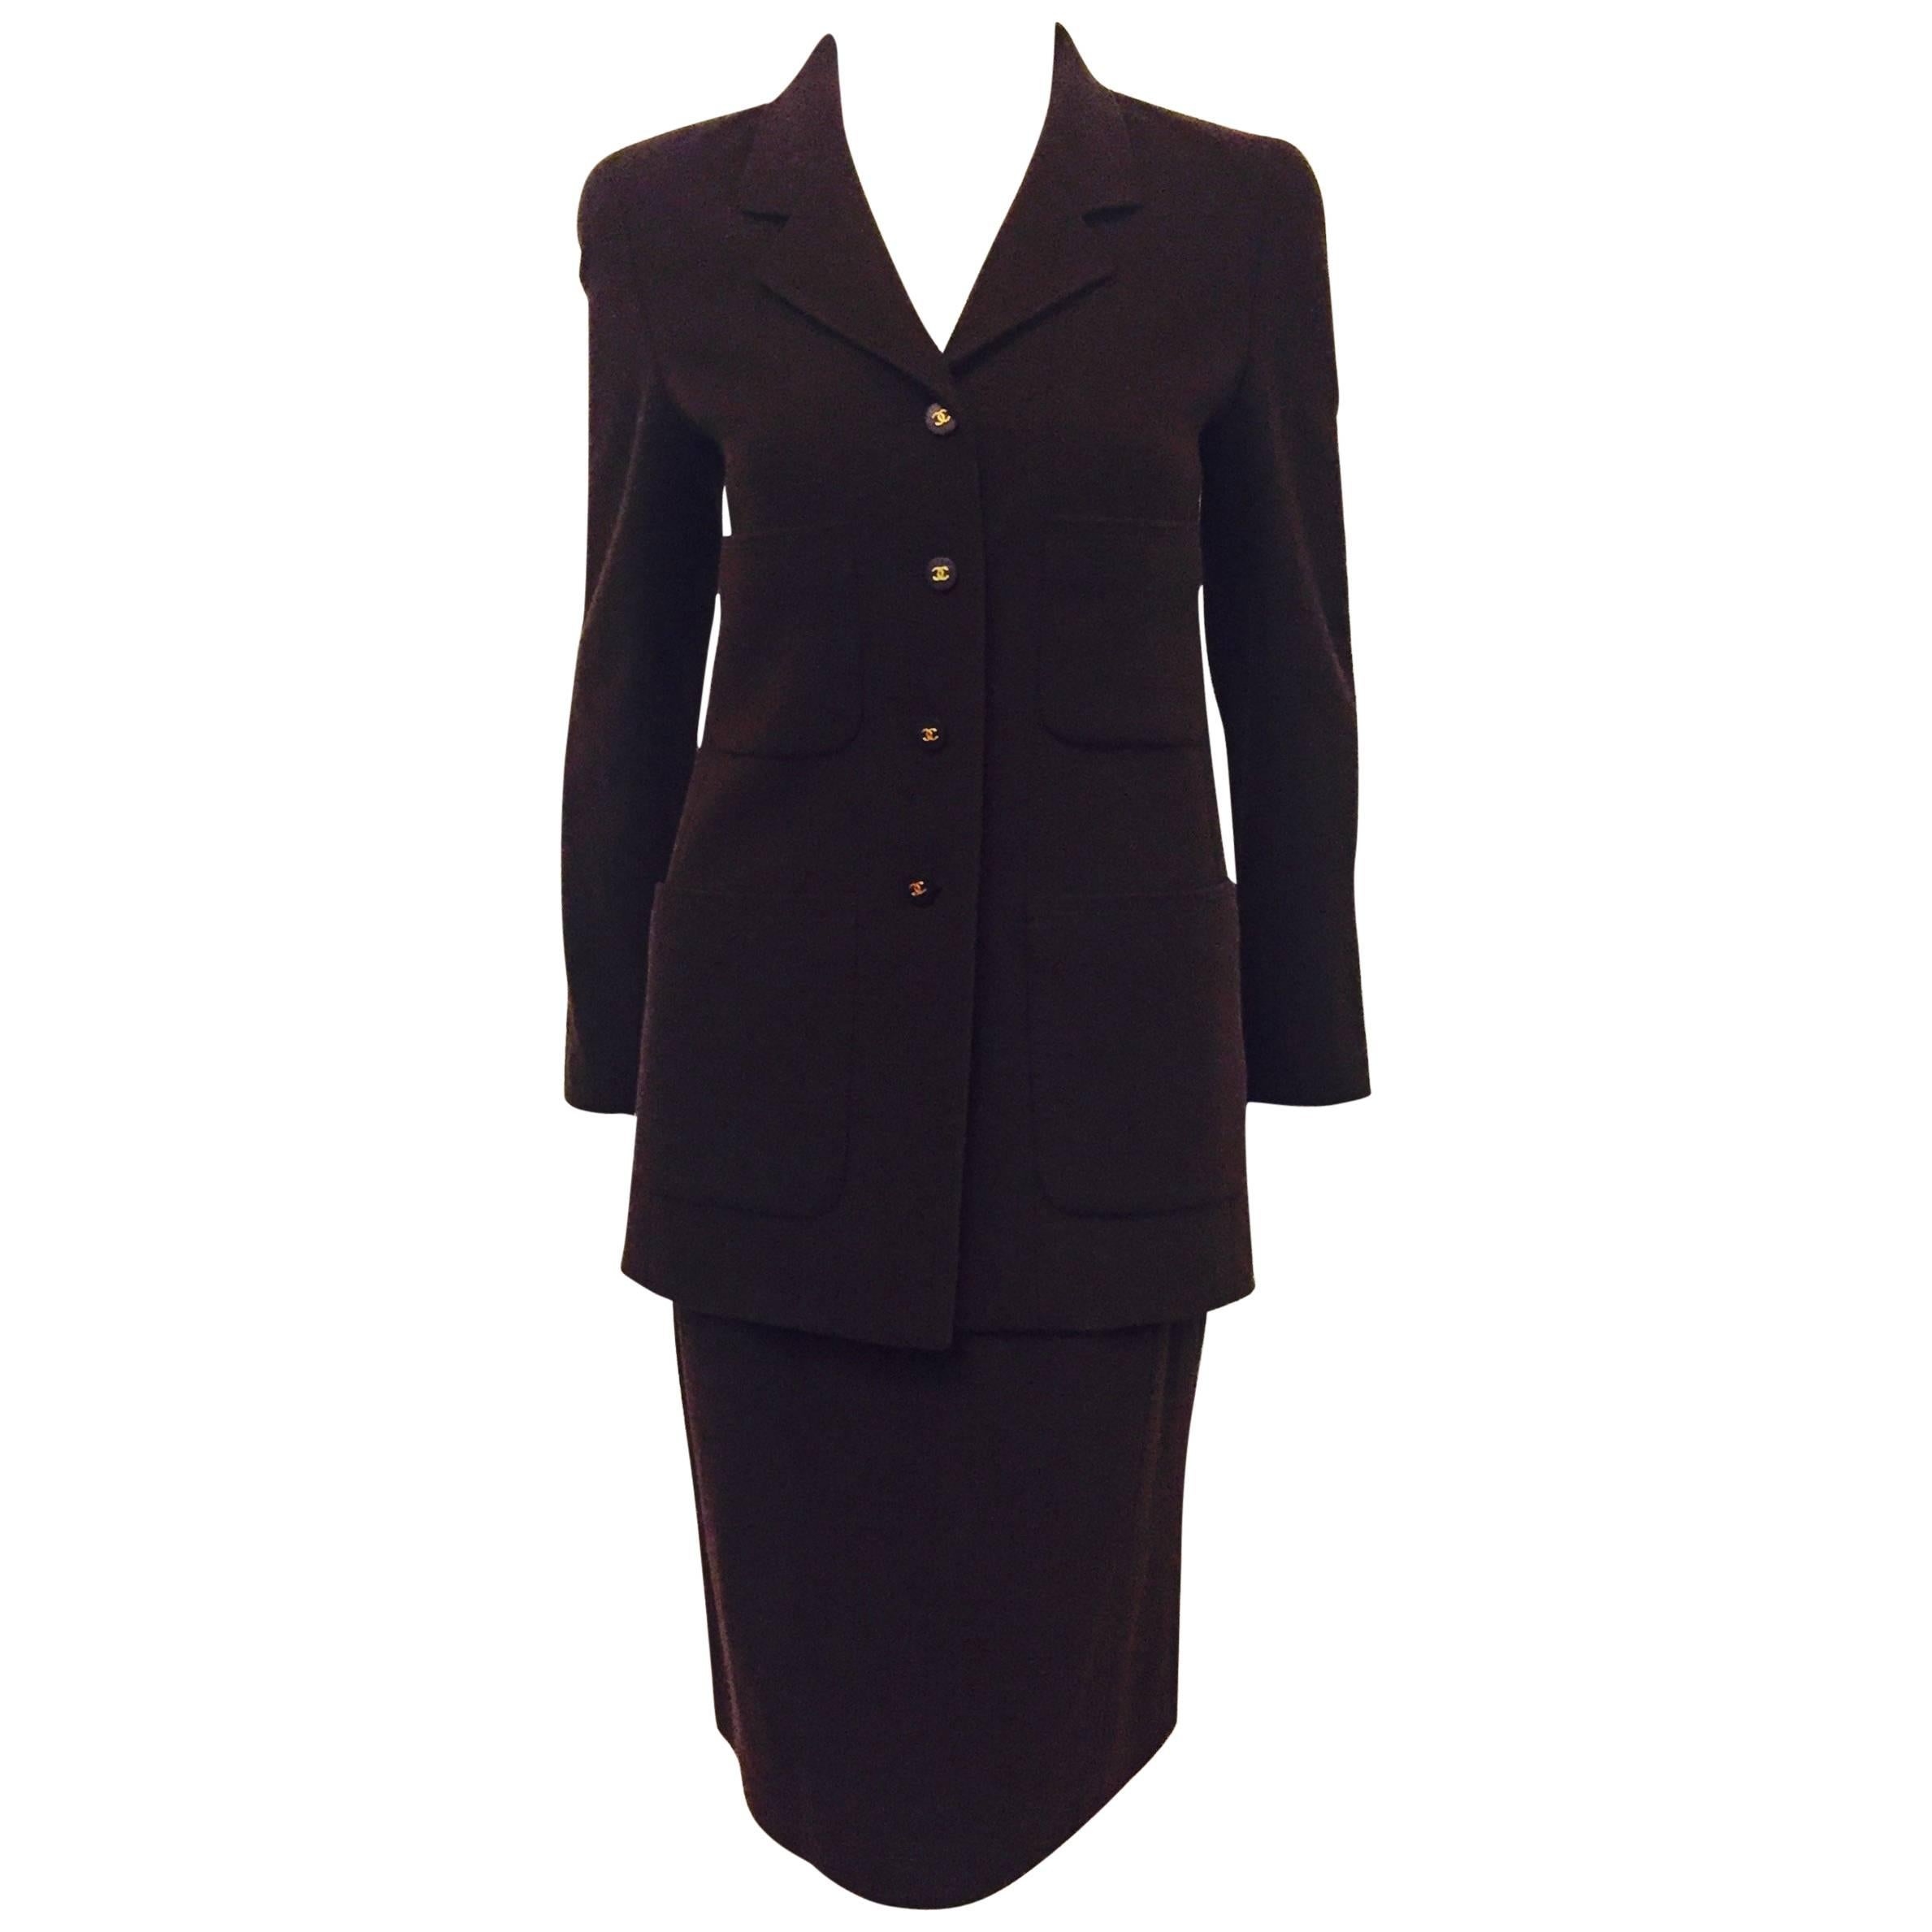 Chanel Boutique Chocolate Wool Blend Skirt Suit with Longer Length Jacket